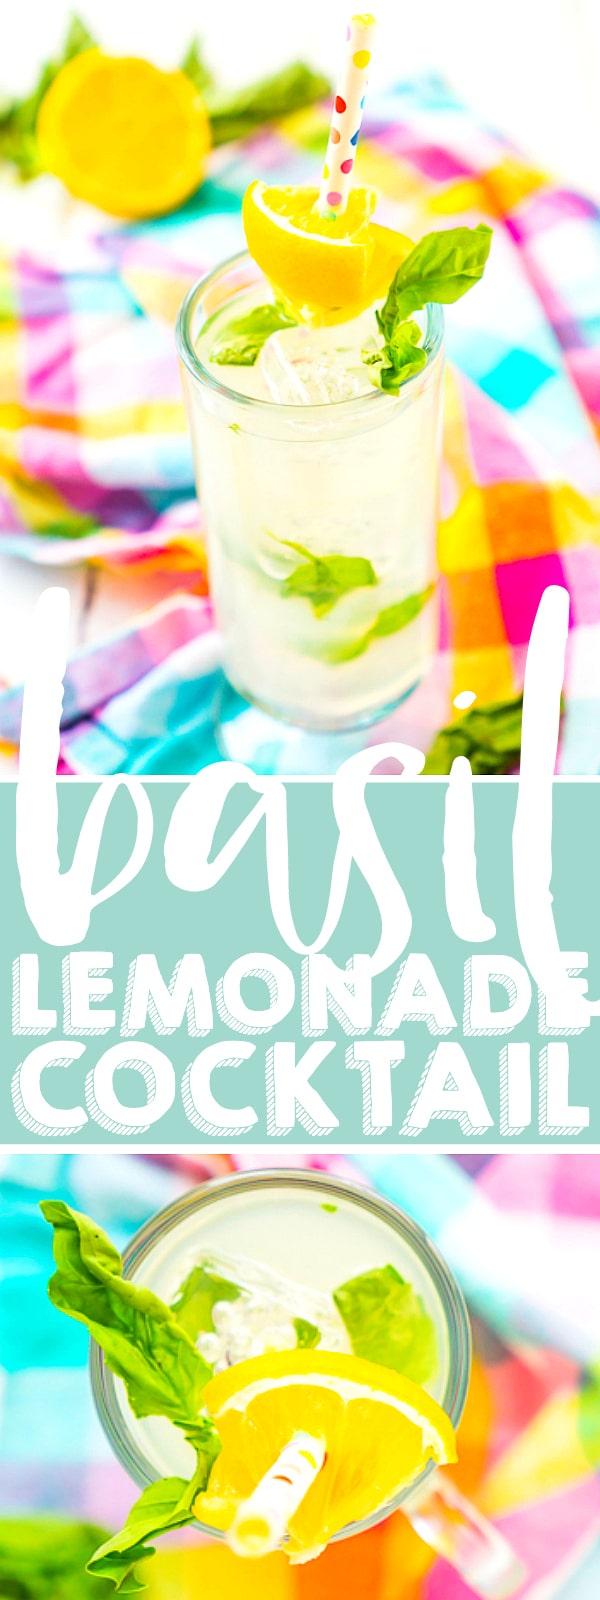 Put a fun twist on lemonade with this Basil Lemonade Cocktail recipe! It’s a refreshing summer cocktail that is super simple to make. You won’t regret sipping on this easy vodka lemonade recipe! | THE LOVE NERDS #cocktailrecipe #summercocktail #lemonaderecipe